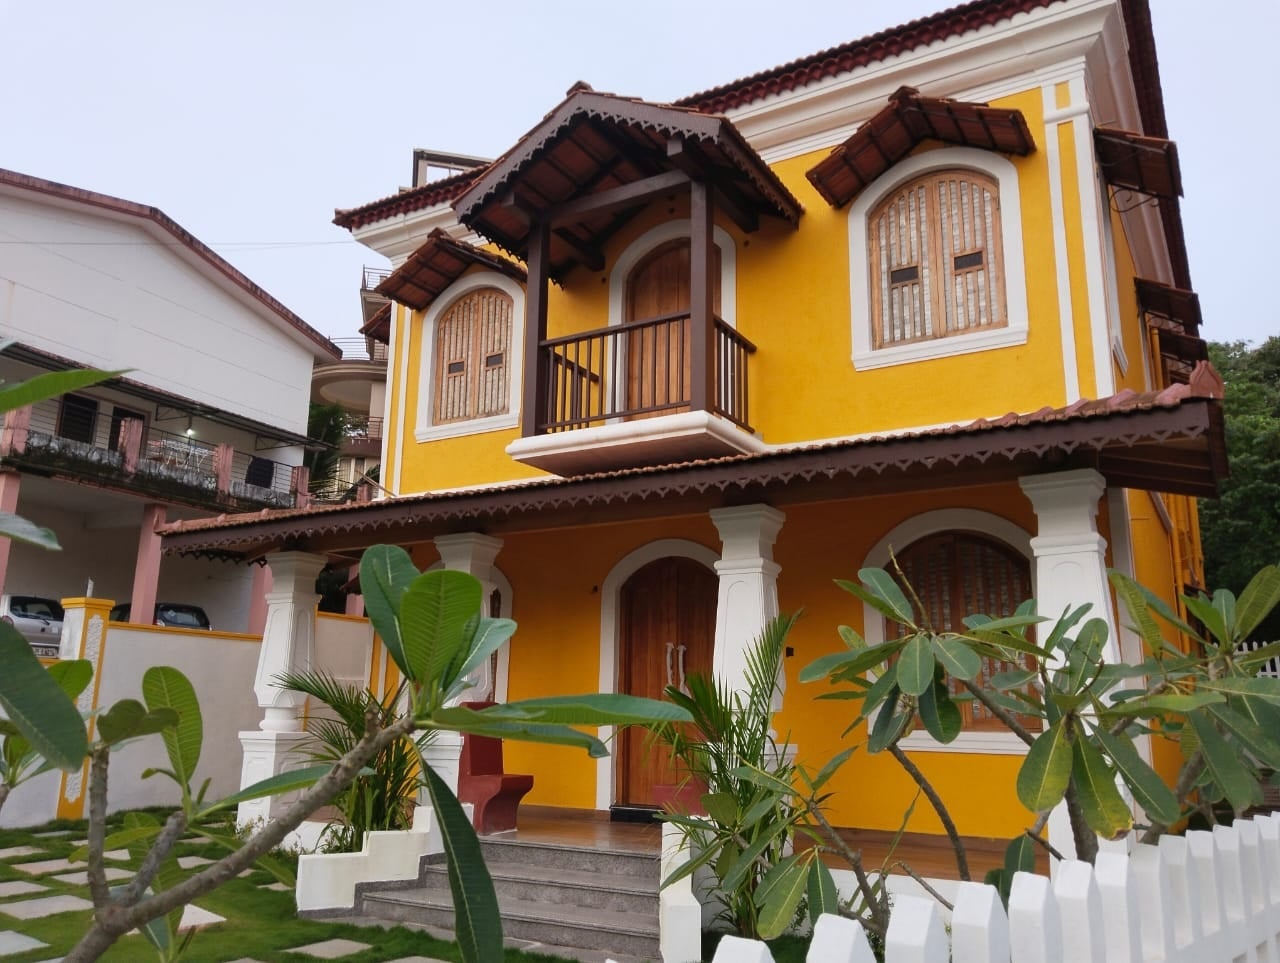 Portuguese style 4 bedroom house with traditional architecture in Porvorim, Goa